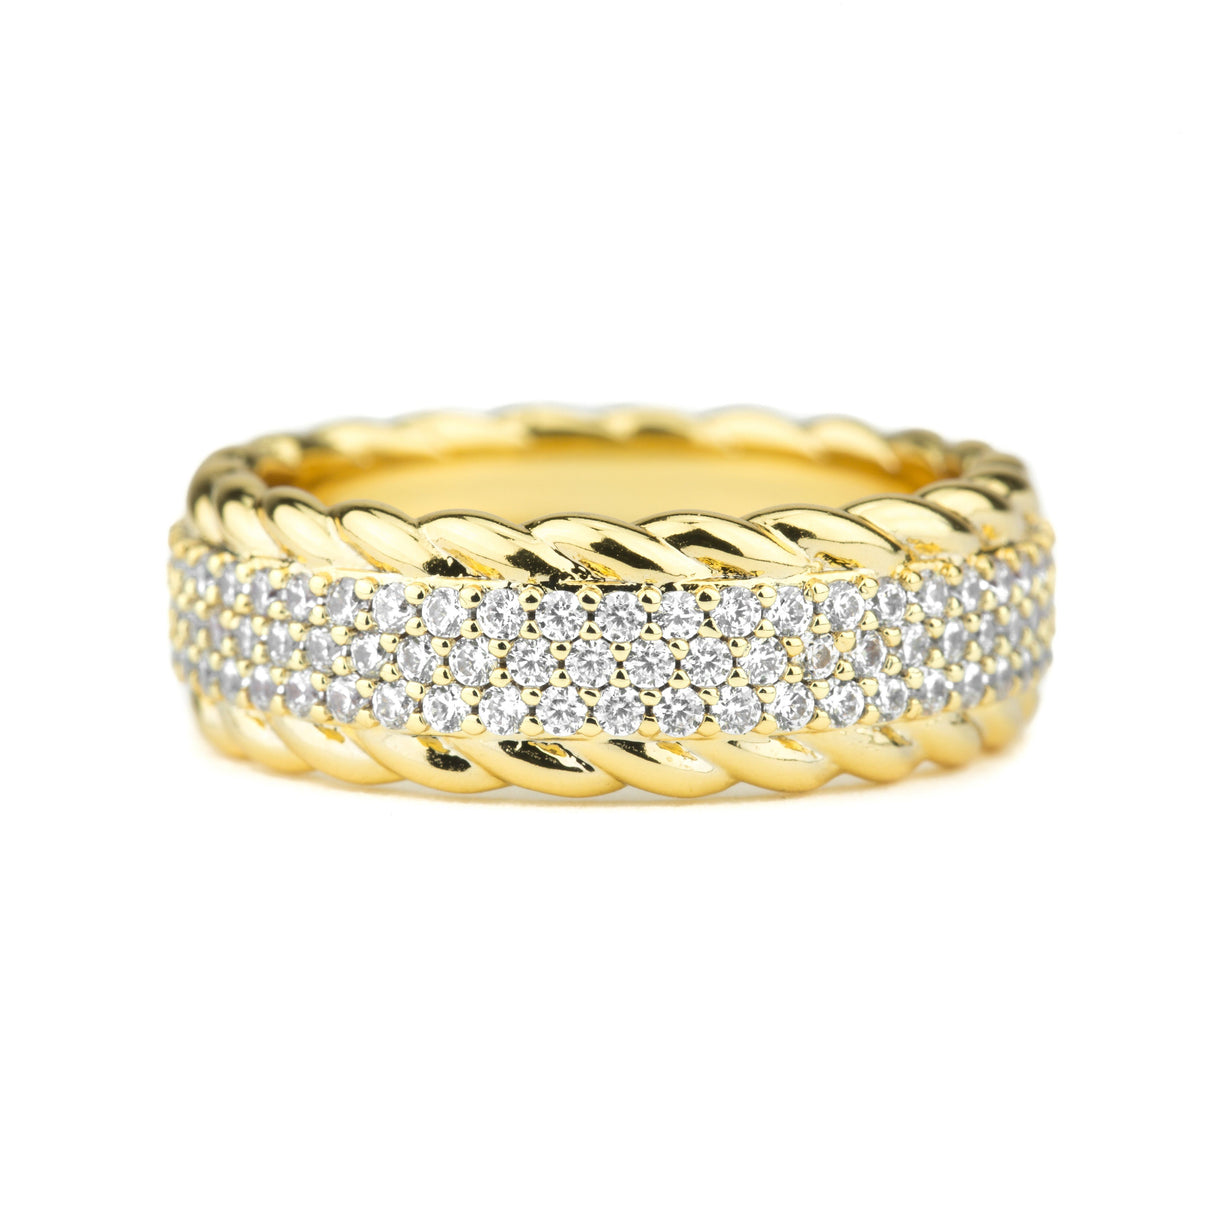 Diamond 3-Row Rope Ring The Gold Goddess close up view 2